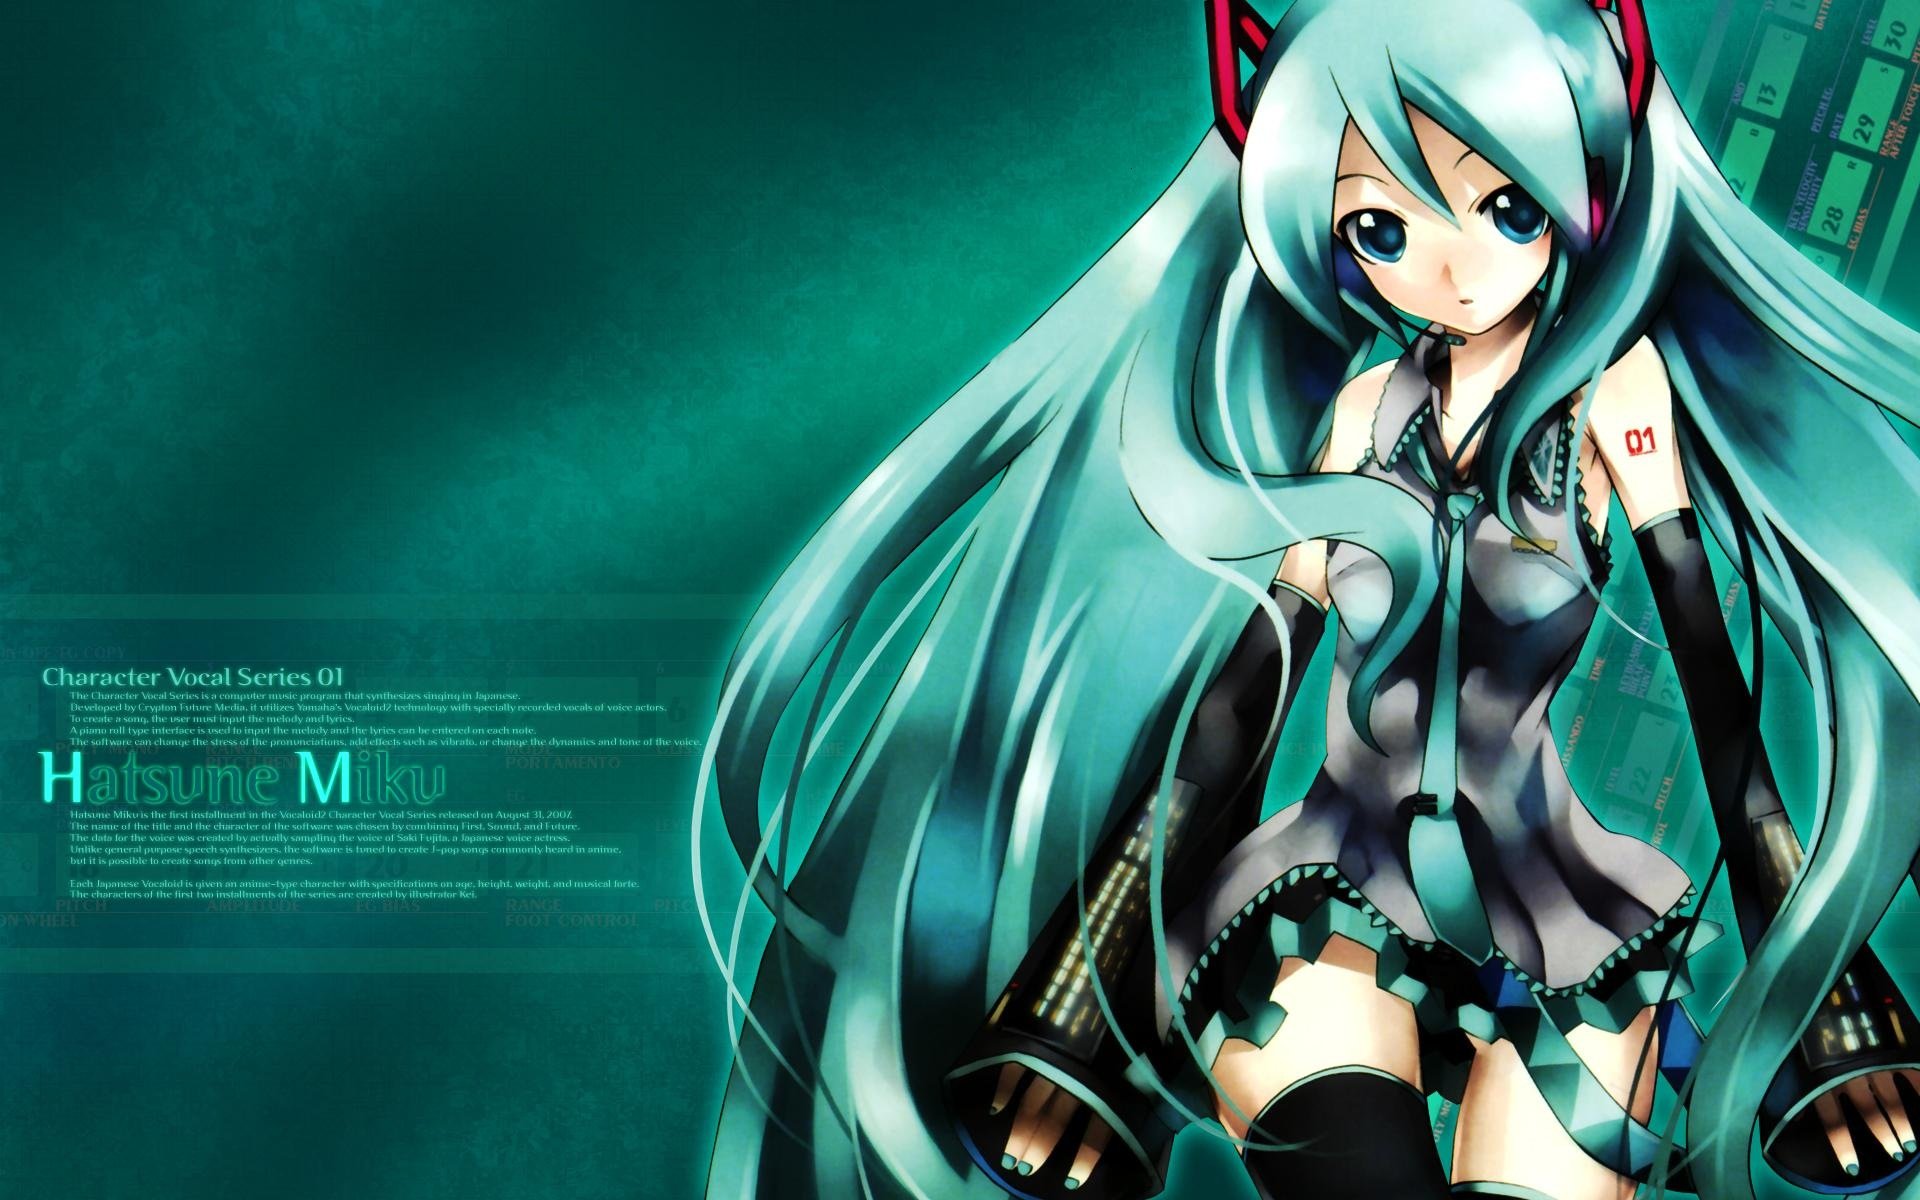 Hatsune Miku Cute Wallpaper Images amp Pictures   Becuo